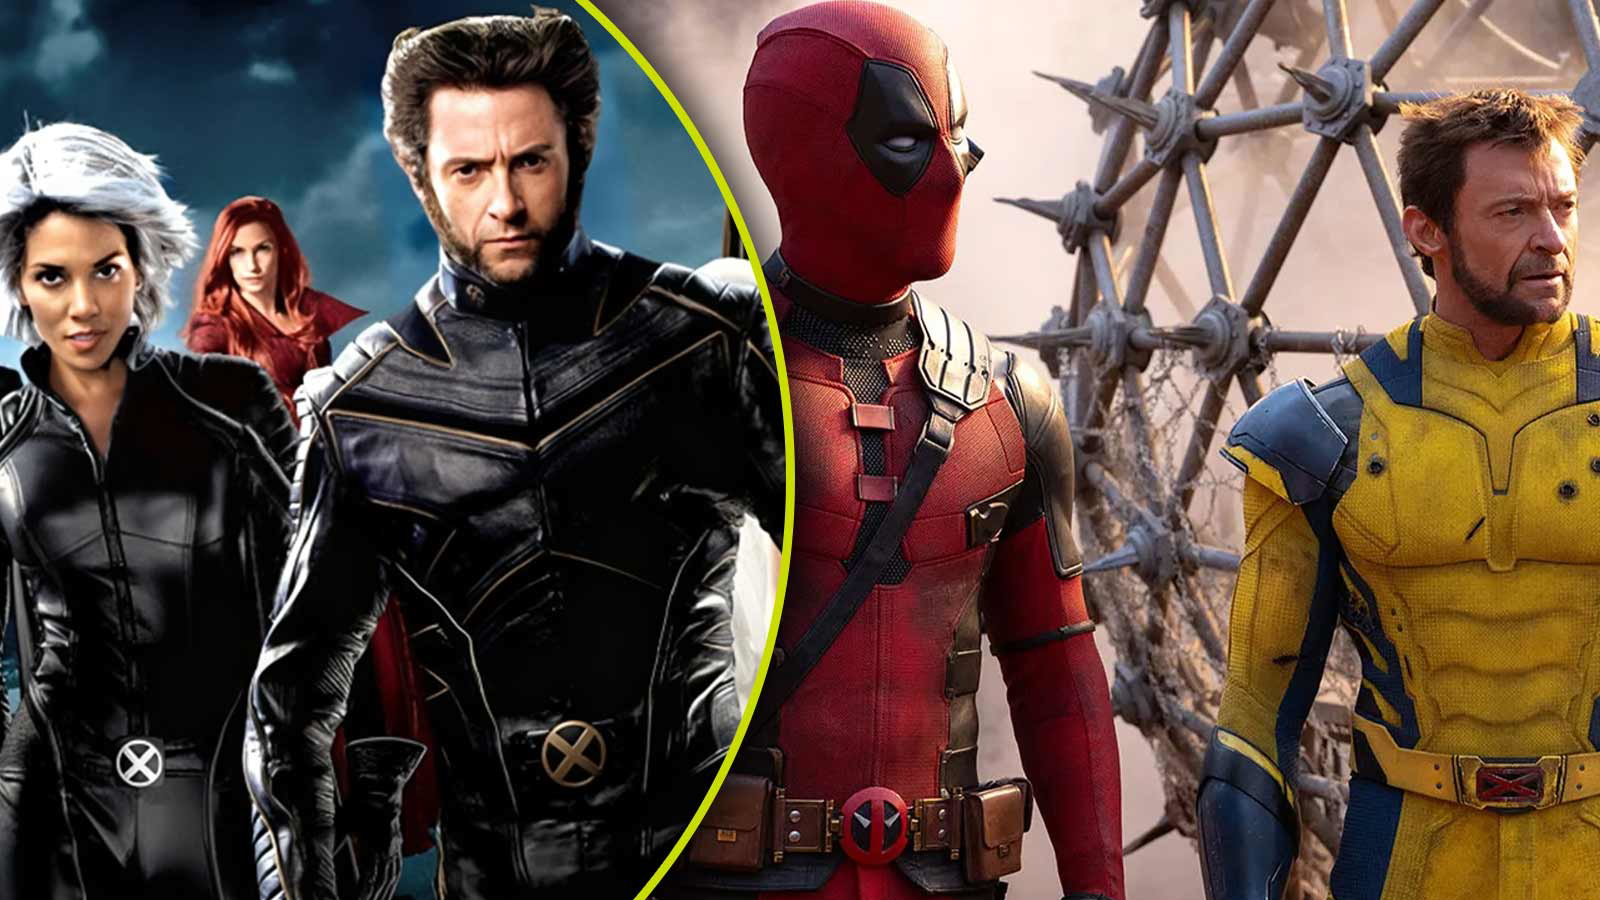 “He’s like the Mad King wanting to burn everything”: X-Men Star’s Return in ‘Deadpool & Wolverine’ Foreshadows an Evil Twist in the MCU Film